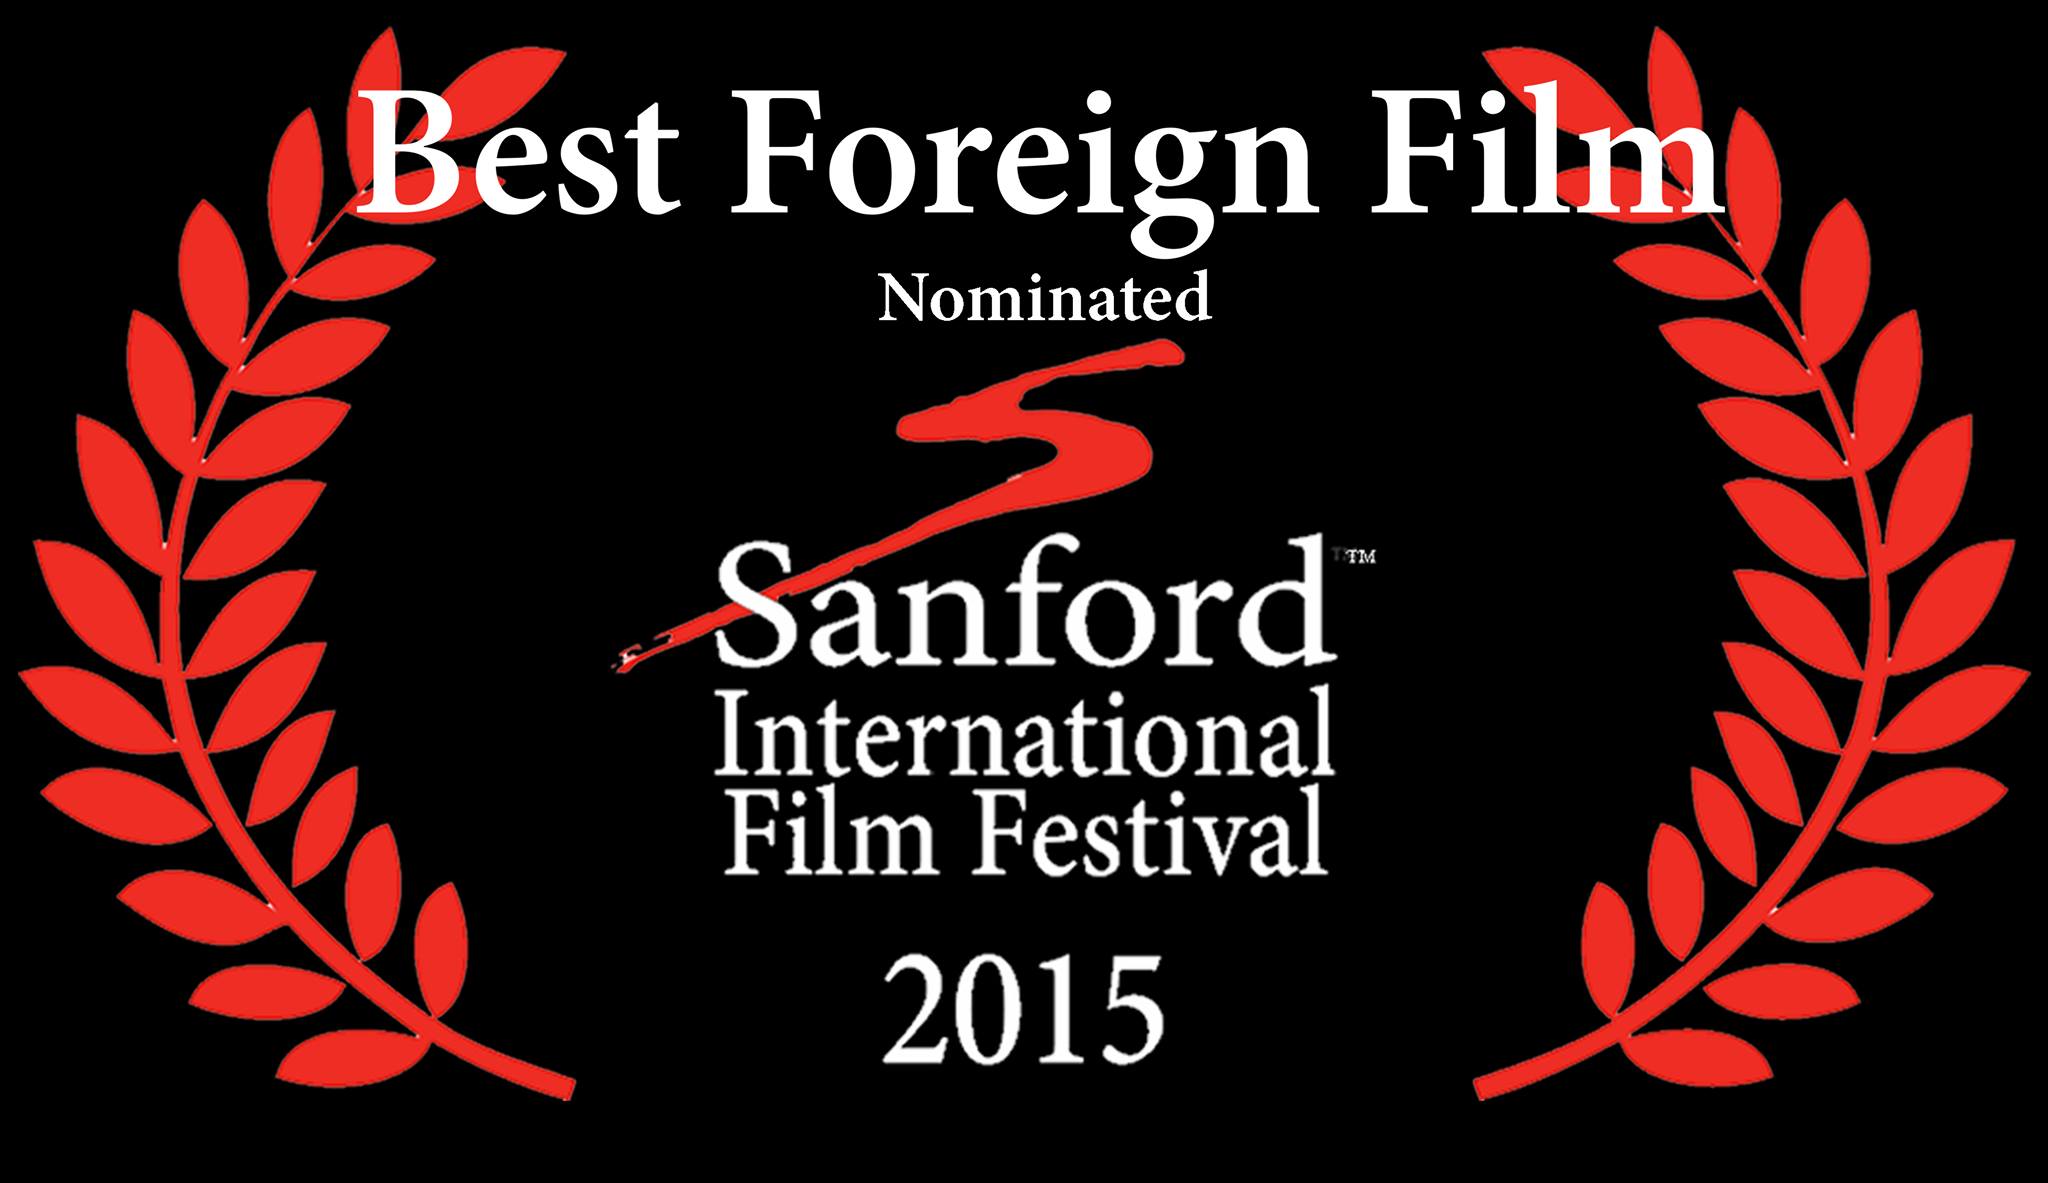 Sur-Luck(Underground), one part of SUR-REAL trilogy by Tom Jumpoth, earned Best Foreign Film Norminated from Sanford International Film Festival 2015.